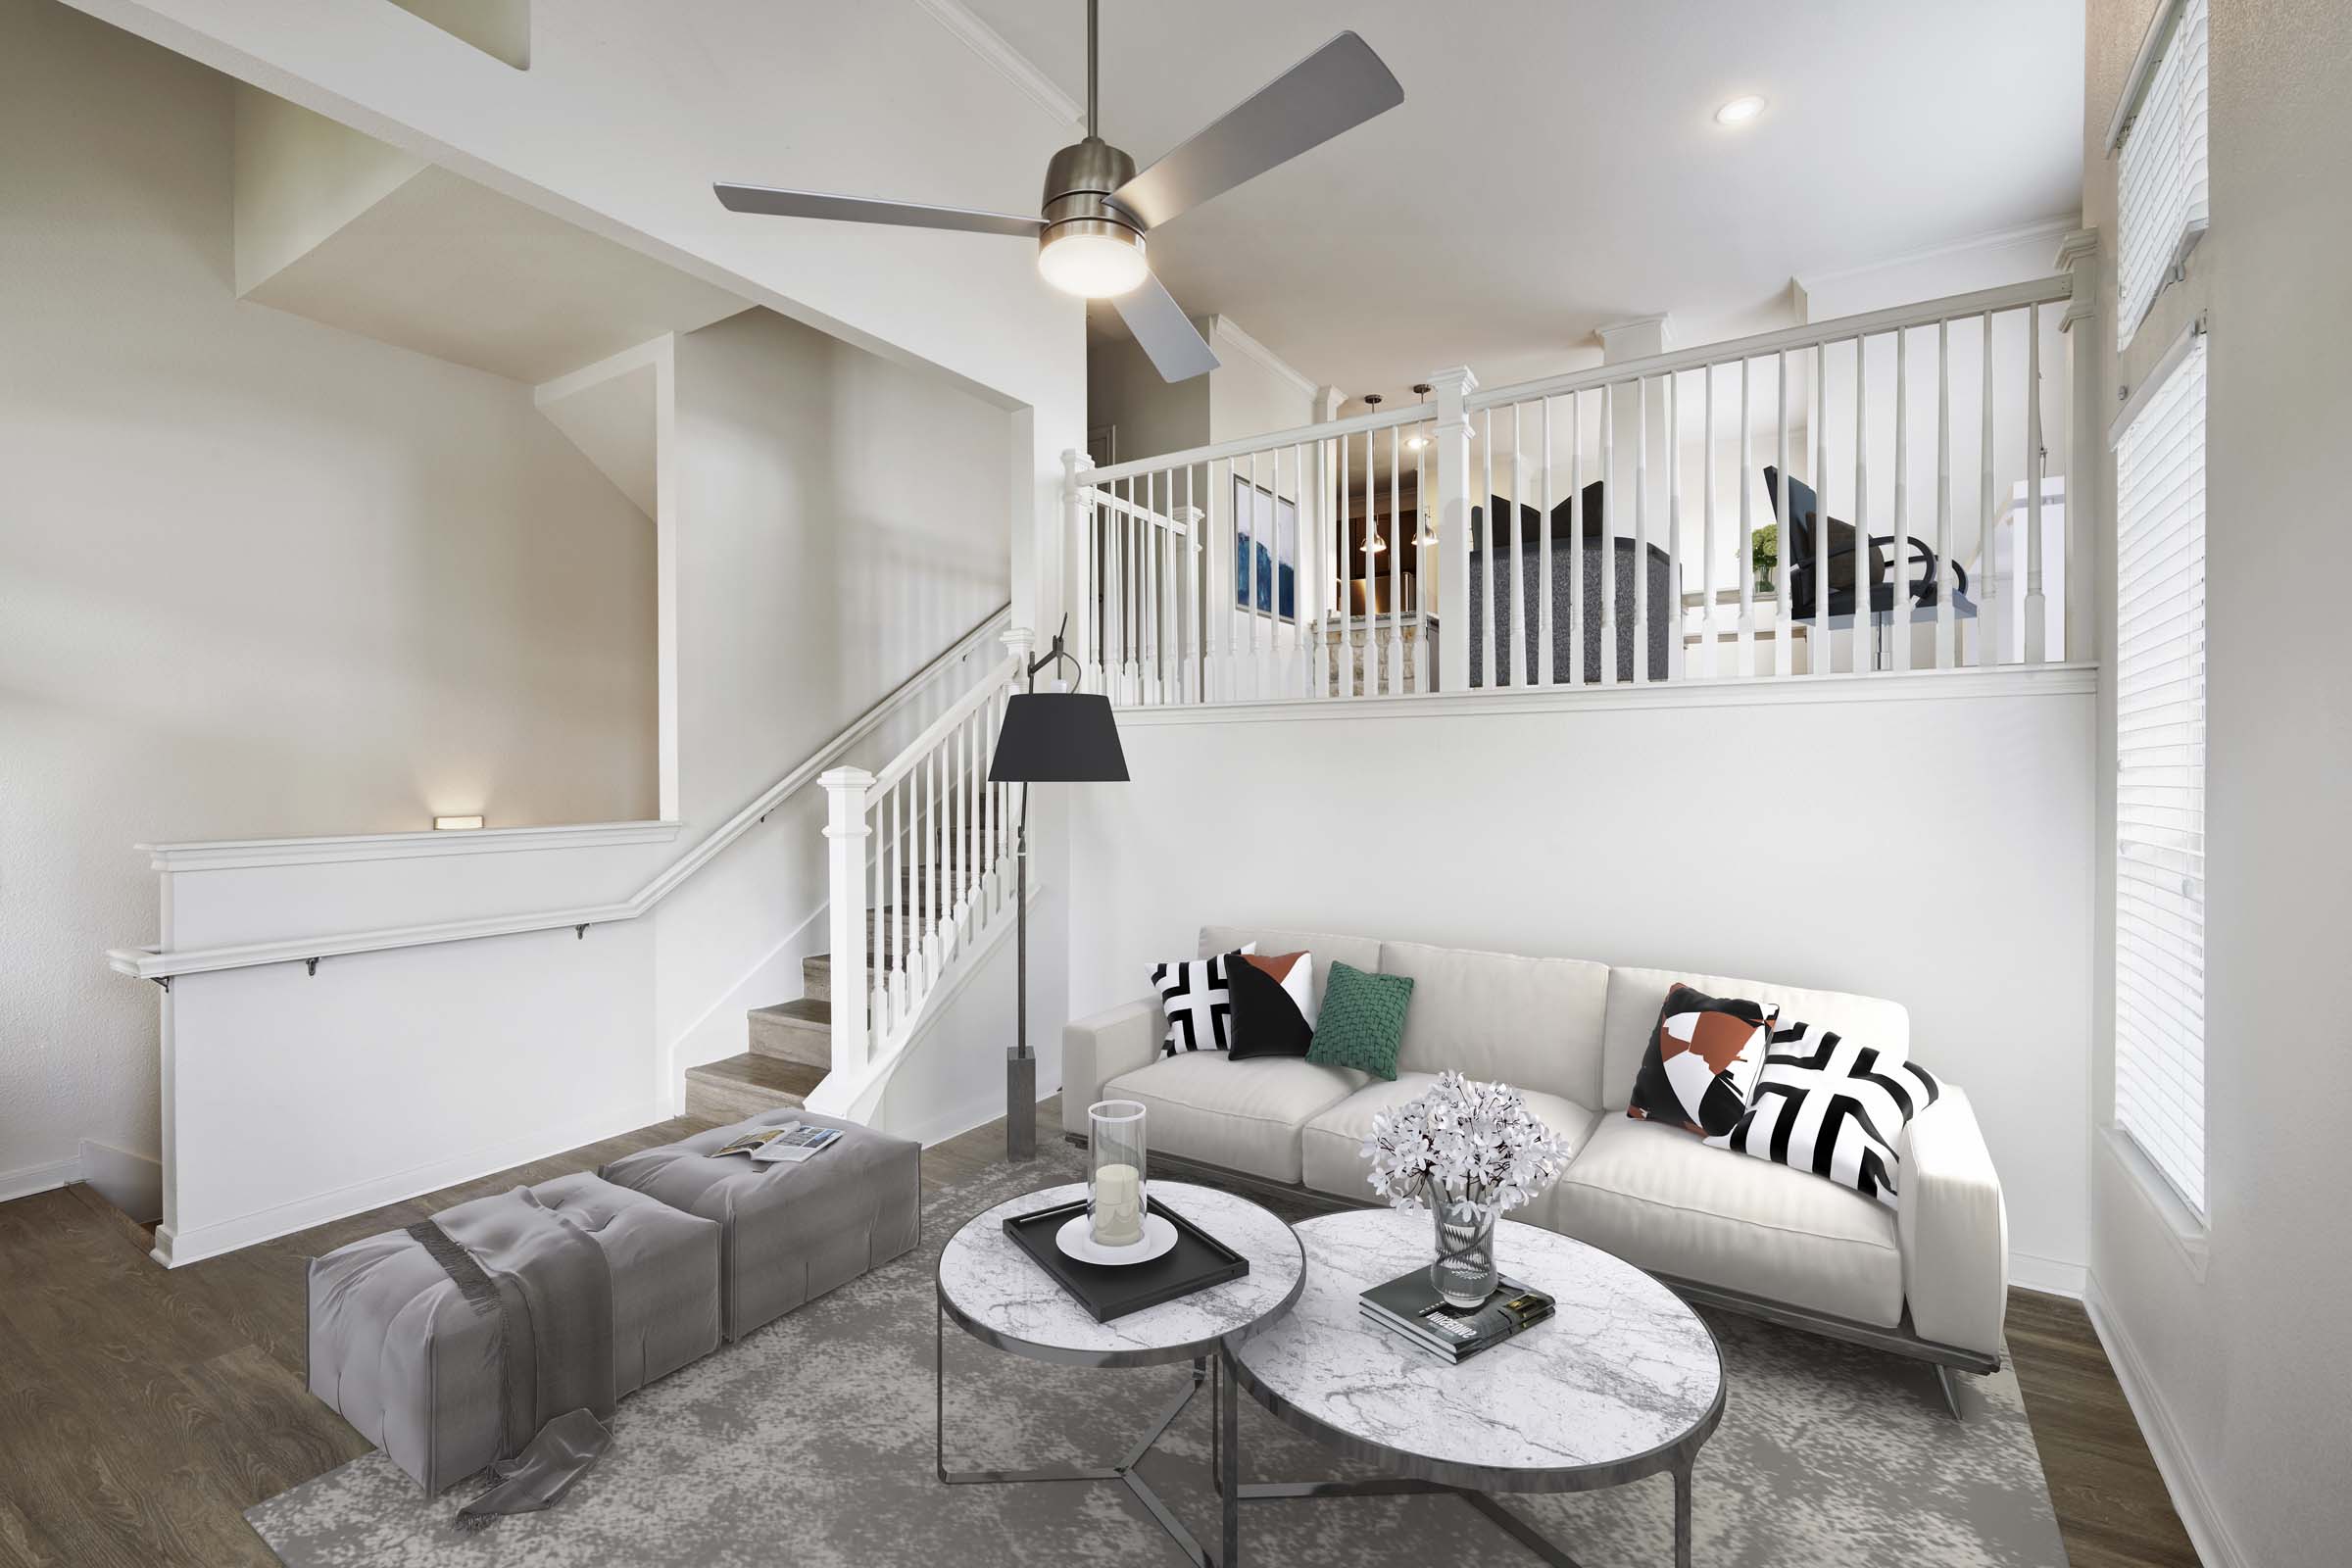 Multi level townhome living room with ceiling fan and high ceilings